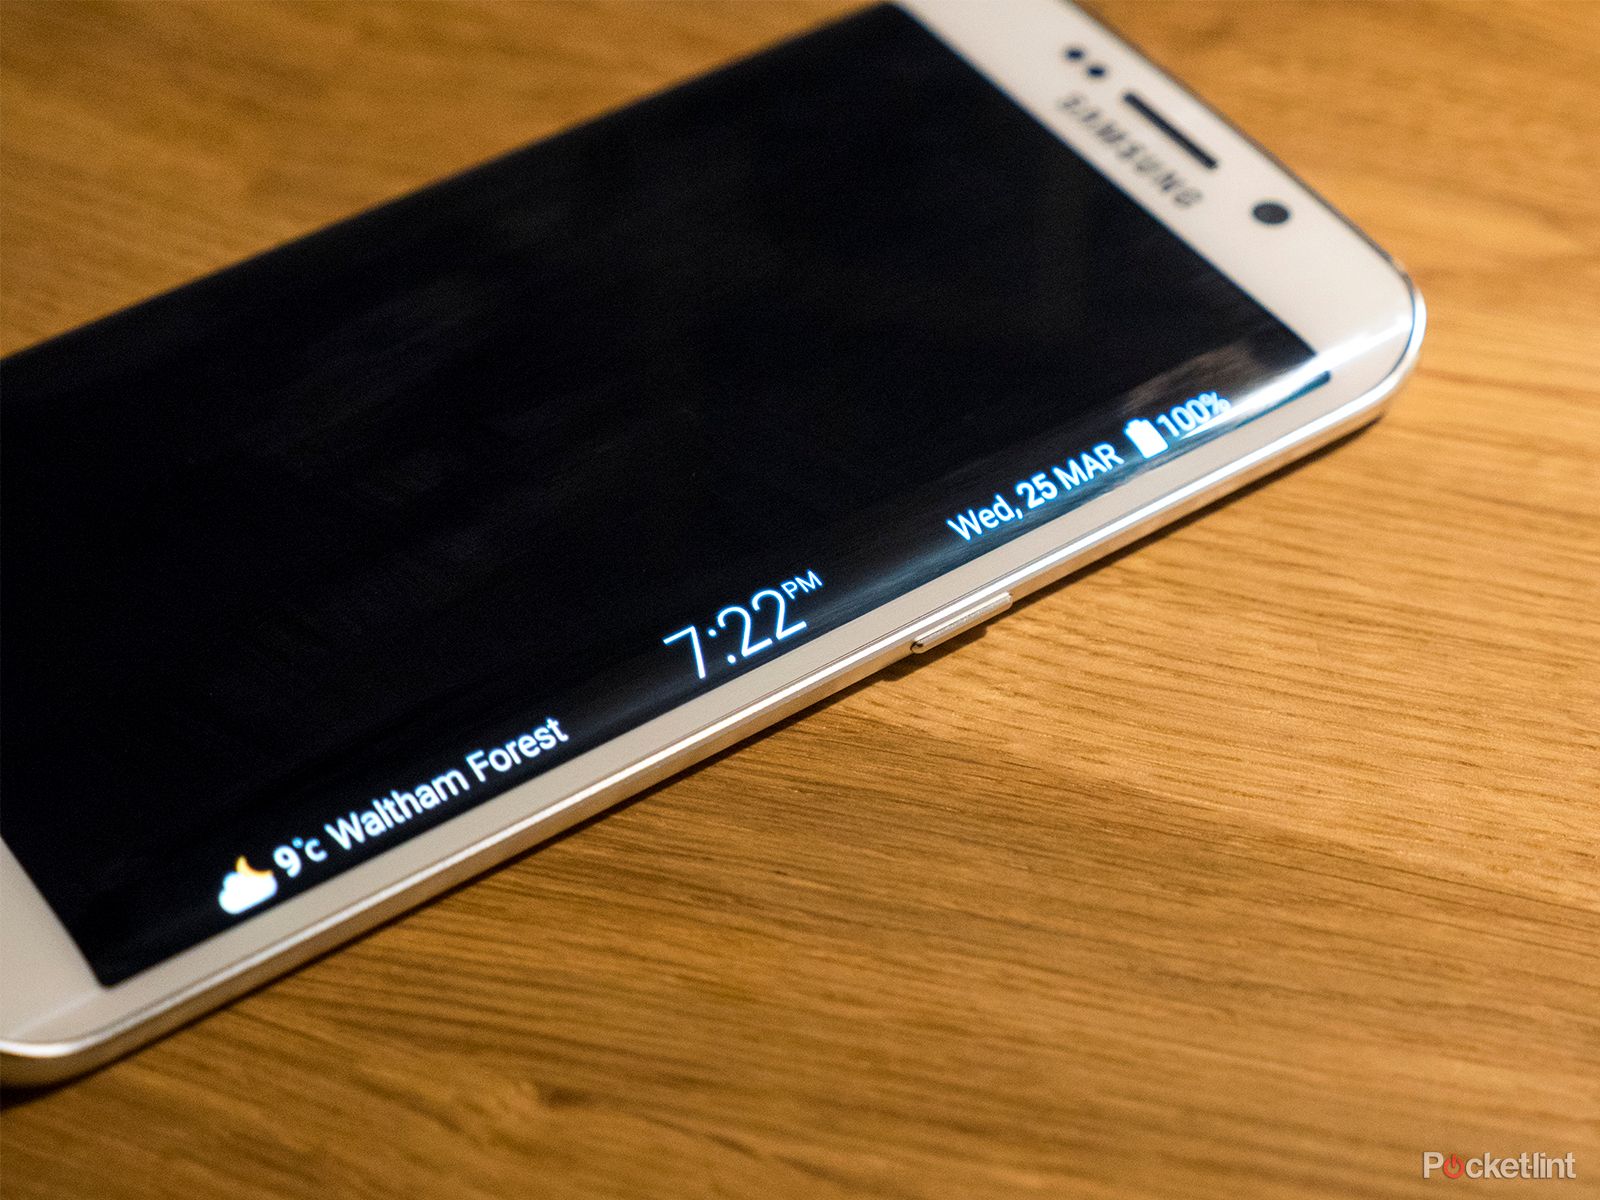 samsung’s apps edge patent could give purpose to the galaxy s6 edge screen image 1